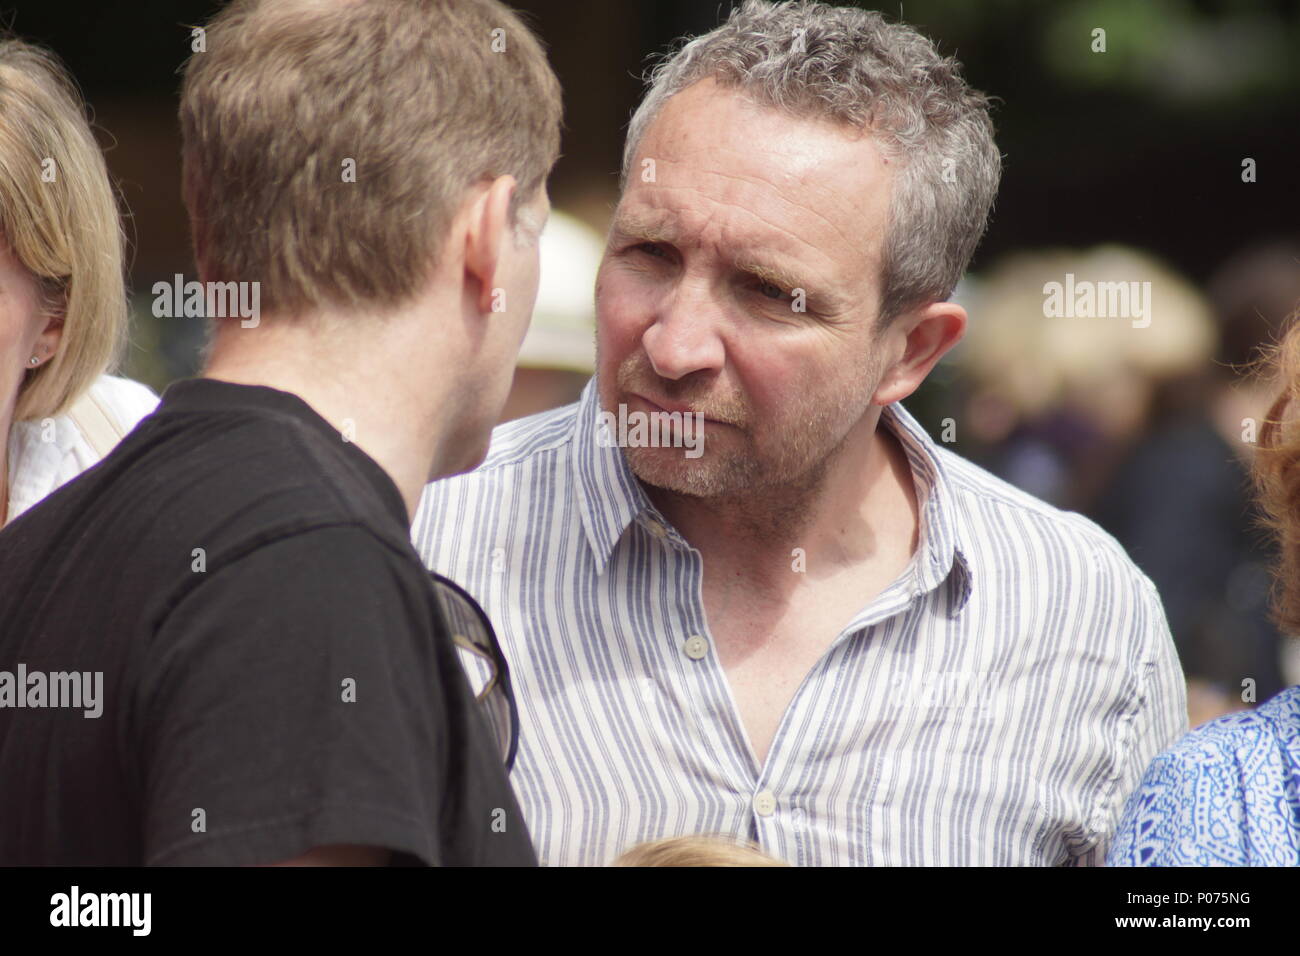 London, UK, 9 June 2018. Eddie Marsan, right.Distinguished actor Eddie Marsan celebrated his 50th birthday by opening the 52nd Bedford Park Festival by Turnham Green tube station in Chiswick. Lyn Goleby announced that Chiswick will have a five screen cinema in Chiswick High Road by the end of 2019, a model of which was on display. Bric-a-brac, secondhand books and local jams and other produce filled the trestle tables of the stalls at this spectacular jumble sale. This year's theme being the works of Beatrix Potter. © Peter Hogan/Alamy Live News Credit: Peter Hogan/Alamy Live News Stock Photo